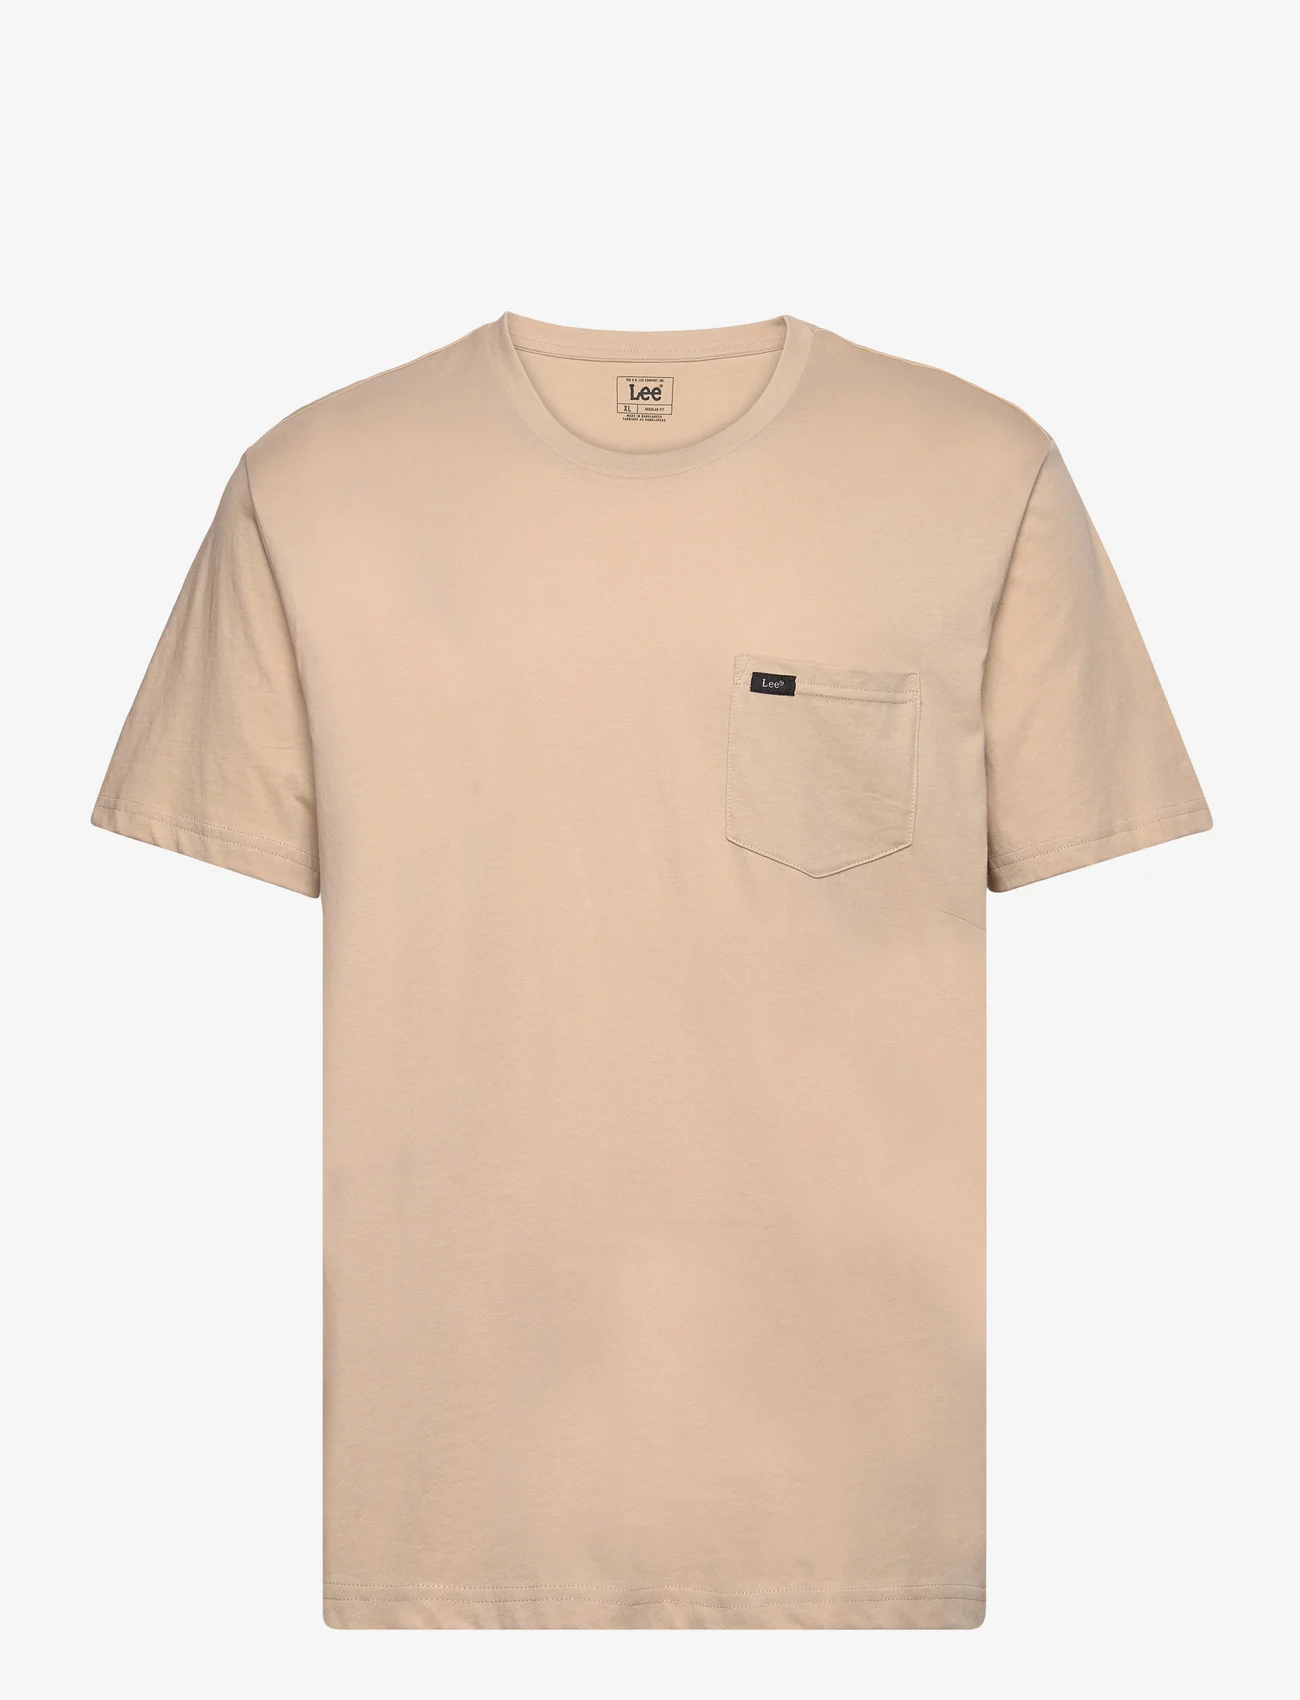 Lee Jeans - Pocket Tee - short-sleeved t-shirts - oxford tan - 0